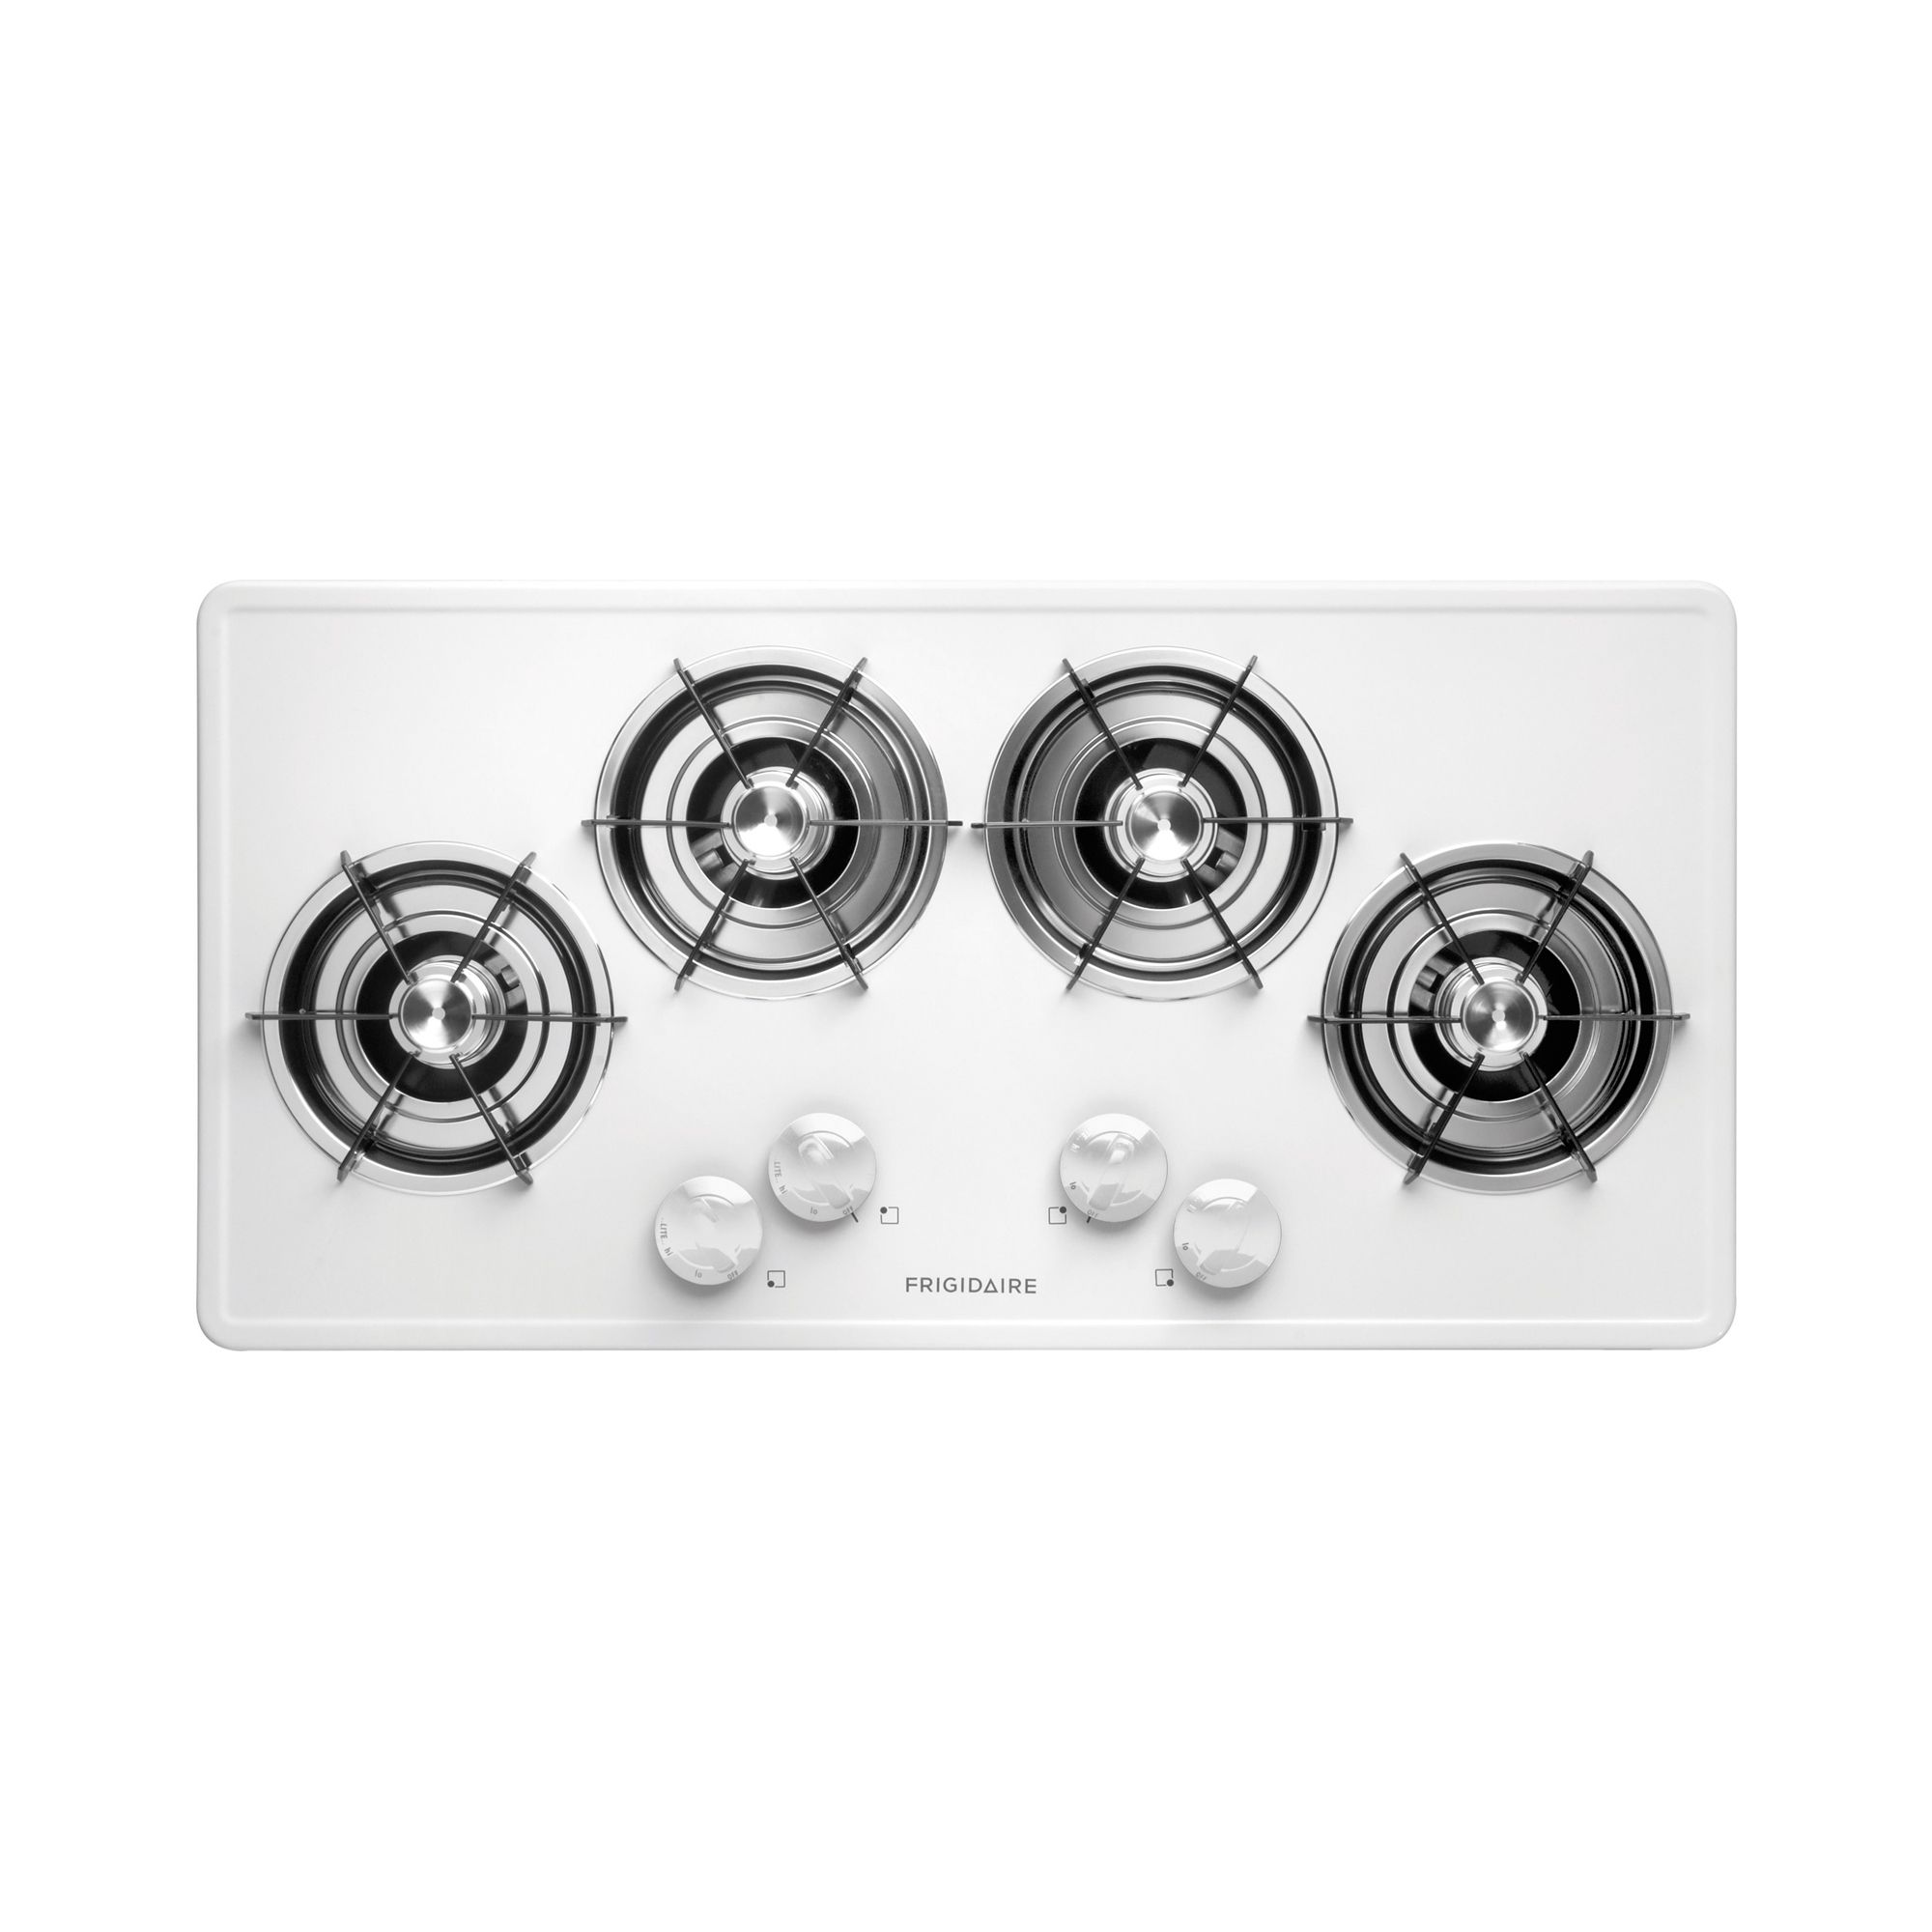 Frigidaire - 36 Built-In Gas Cooktop - White